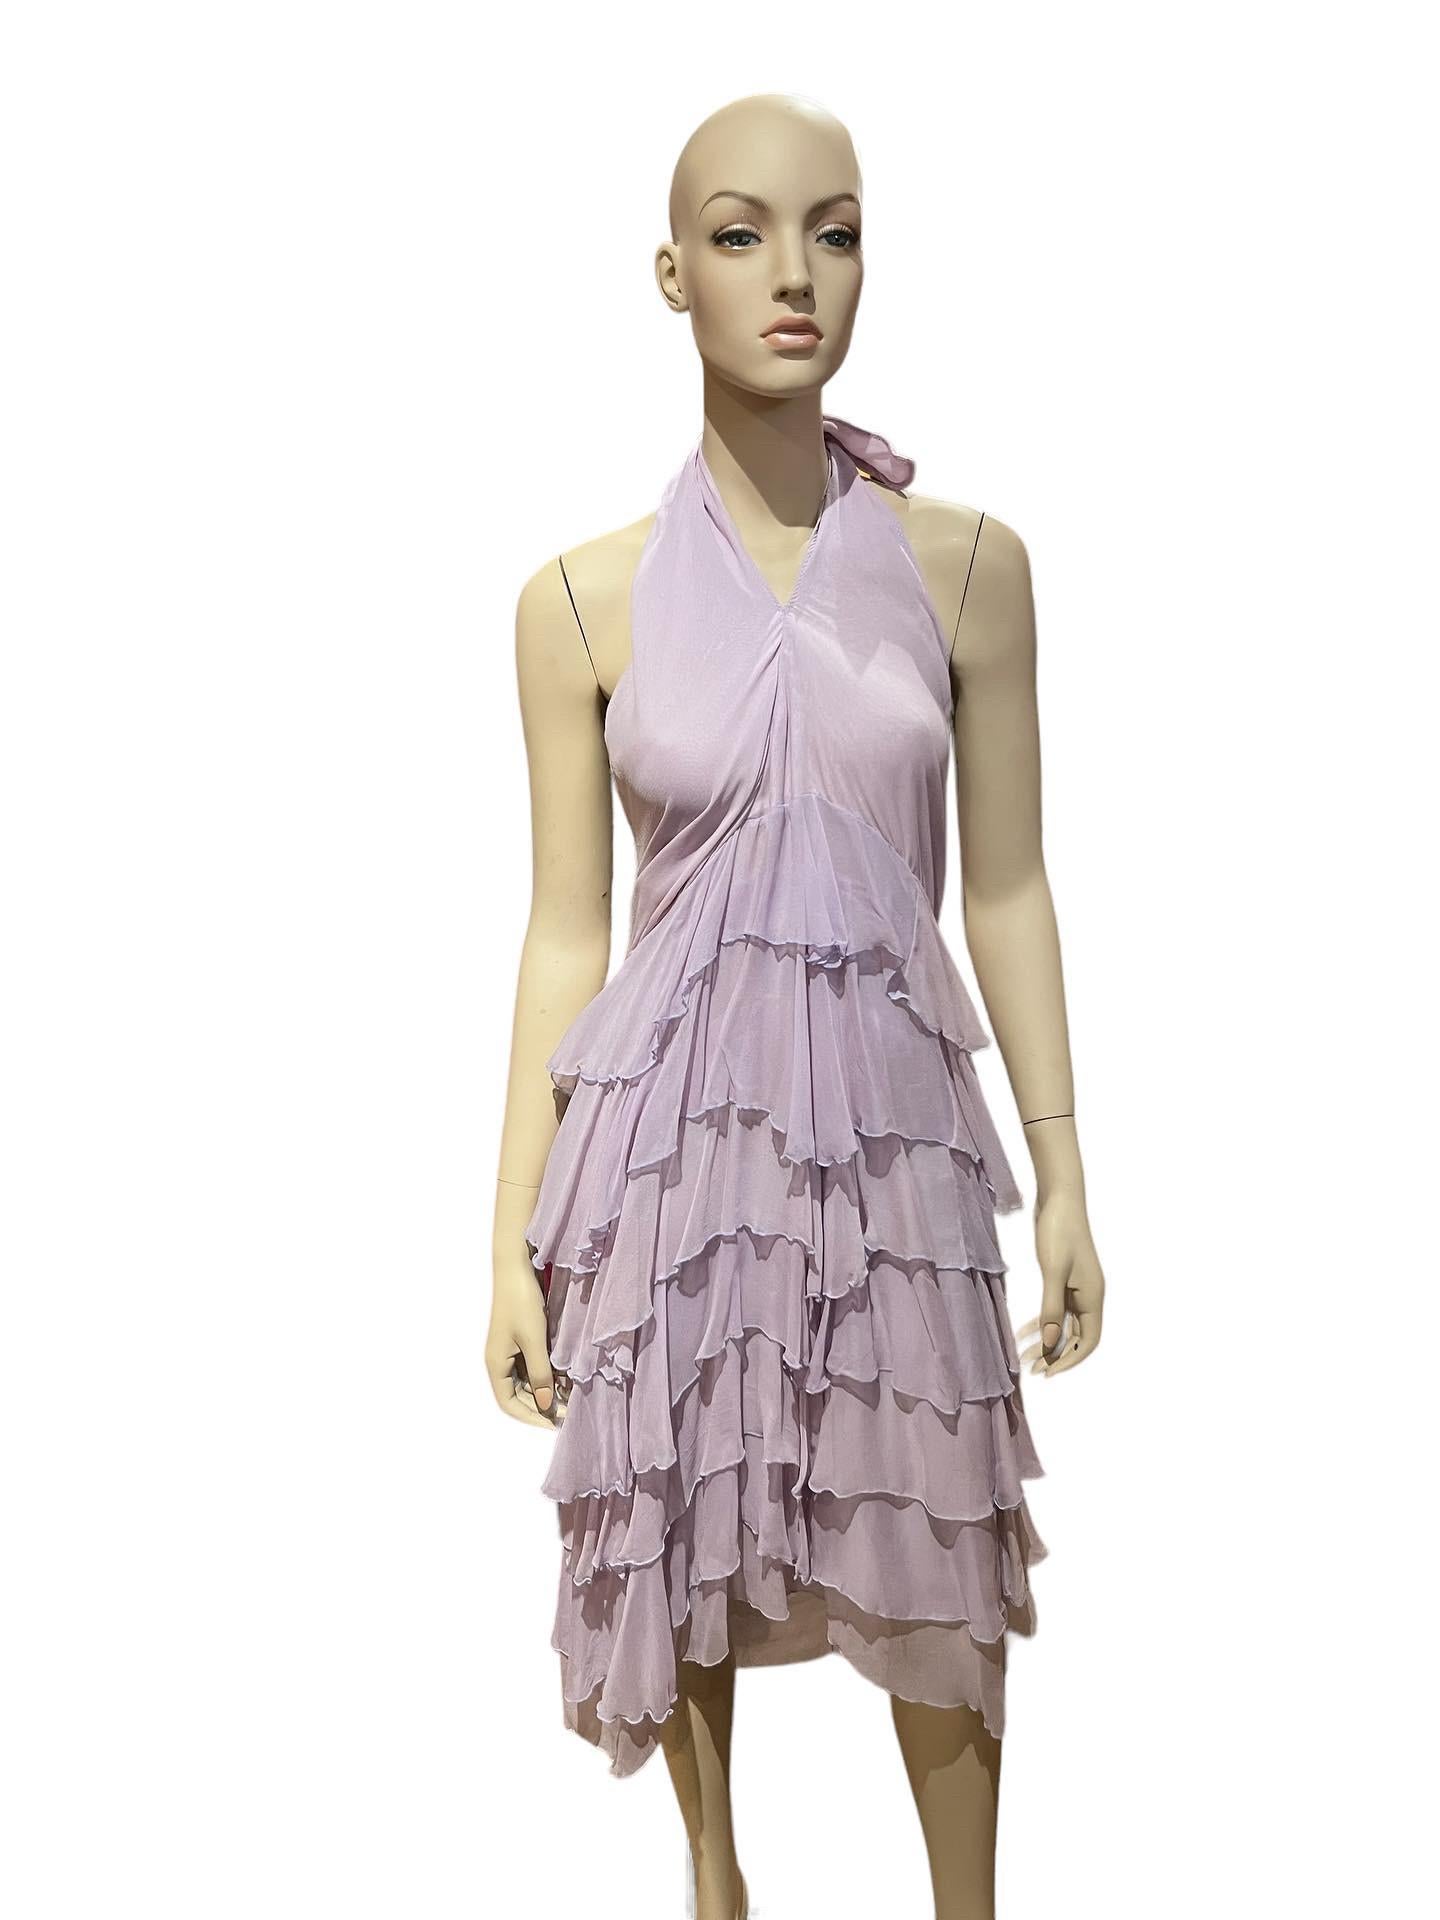 Y2K Stephen Burrows Silk Chiffon Lilac Layered Ruffled Halter Dress 

Size: Small
Bust: 32”

Stephen Burrows is an American fashion designer based in New York City, known for being one of the first African-American fashion designers to sell